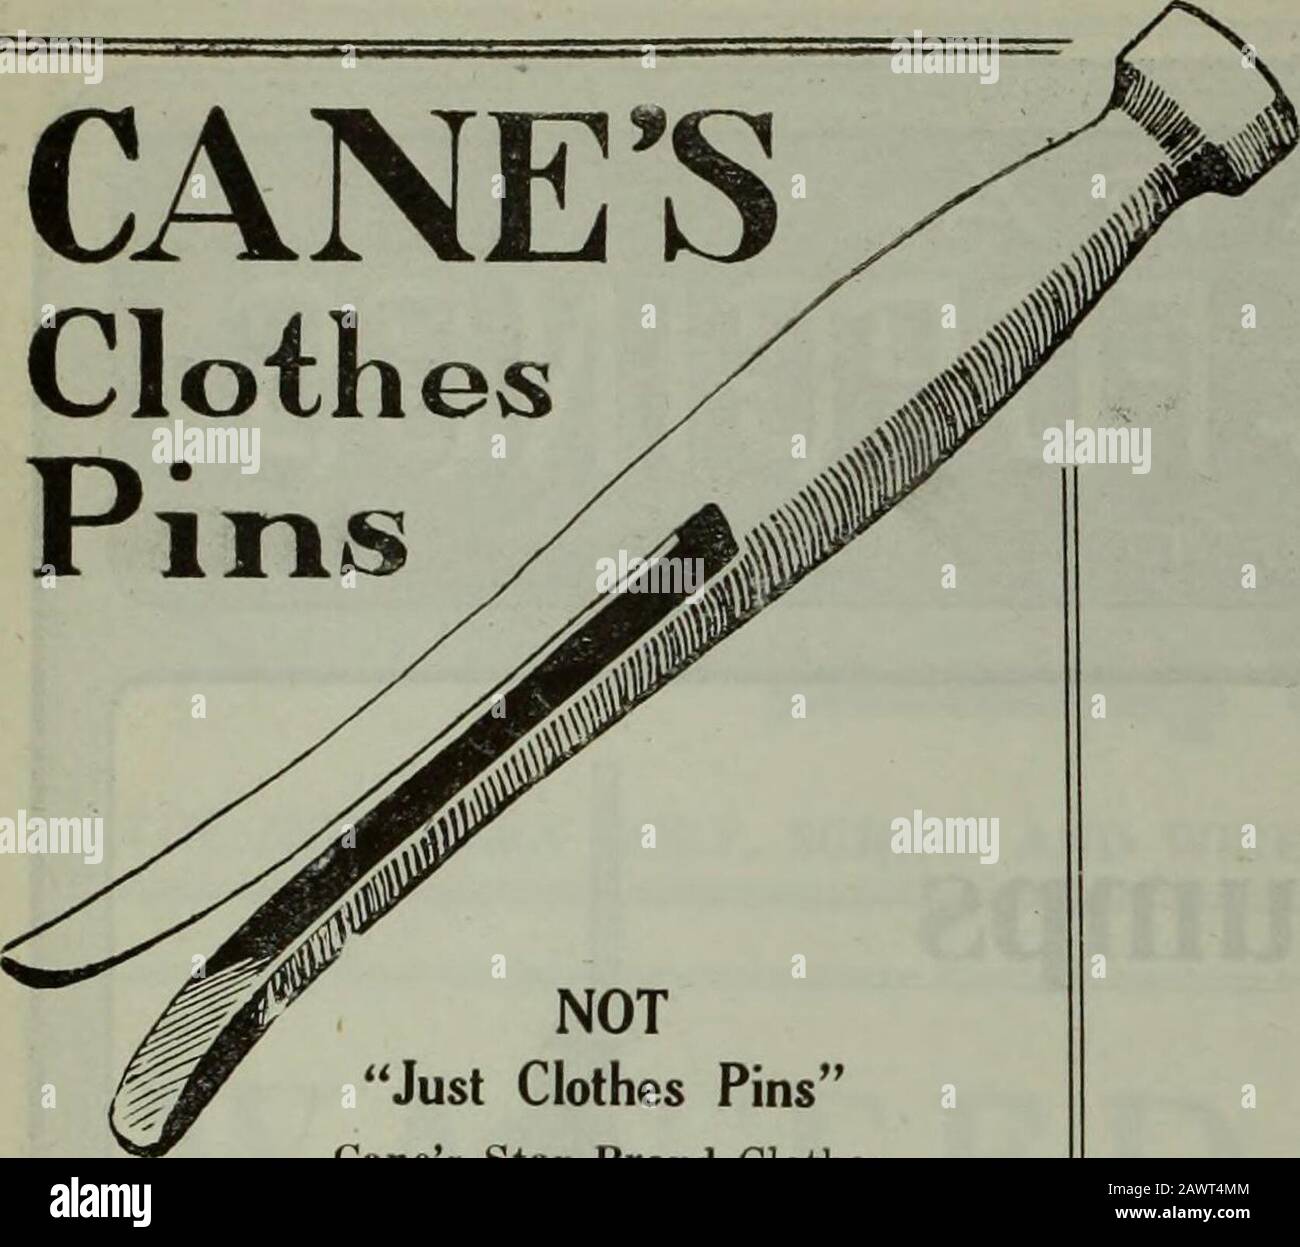 Hardware merchandising January-March 1919 . 22 II A K I) W A RE A N D METAL January 11, 1918.. CANES Clothes Pins NOTJust Clothes Pins Canes Star Brand ClothesPins are better—they costno more than just clothespins—but theres a dif-ference.Star Brand are always right in shape,right in length and correct in count.They will not injure the clothes. Your Jobber will be pleased to supplyStar Brand Superior Clothes Pins atno extra cost. The Wm. CANE & SONS Co., Limited MANUFACTURERSNewmarket Ontario Stock Photo